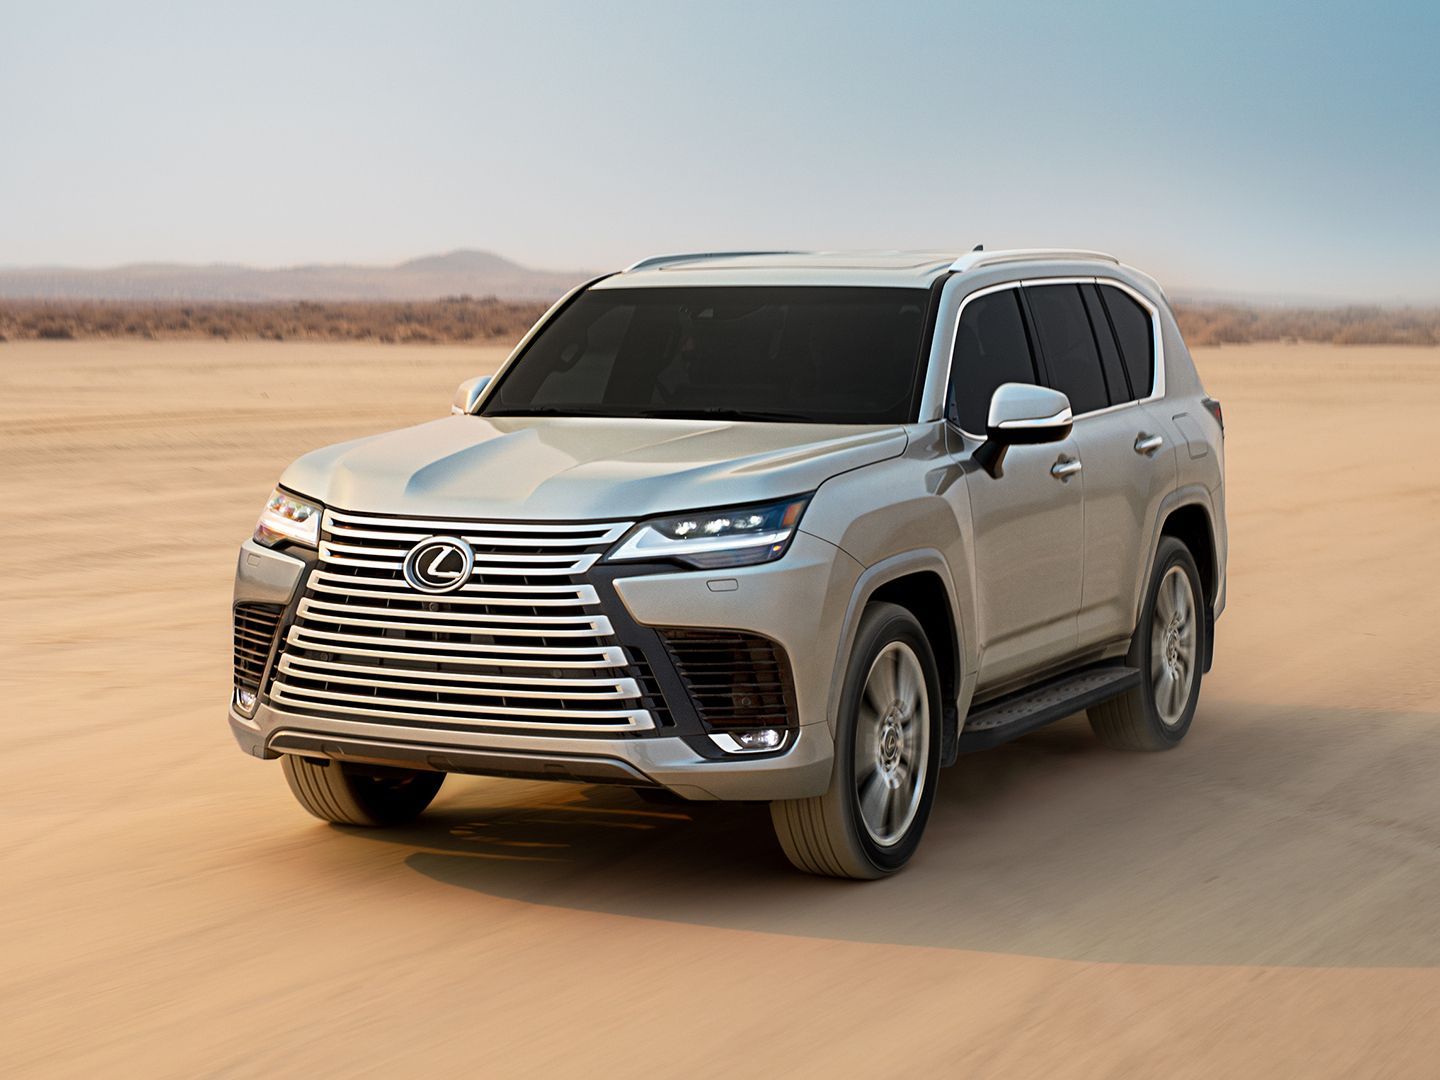 2022 Lexus LX Breaks Cover In The UAE, Could Be Launched In India